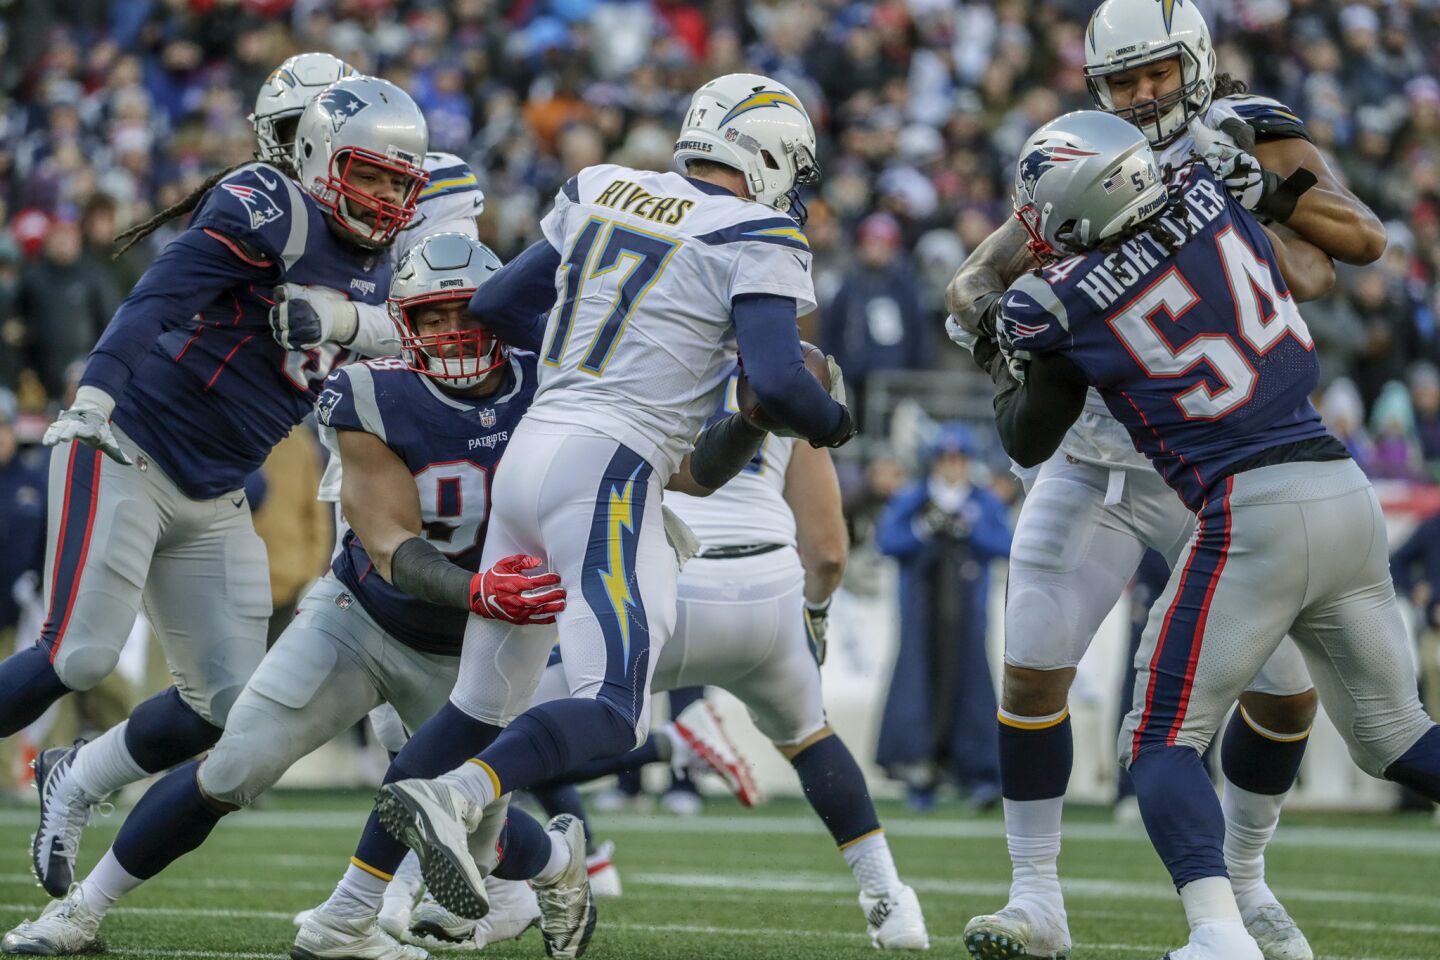 Chargers quarterback Philip Rivers is sacked by New England Patriots defensive lineman Trey Flowers late in the second quarter in the NFL AFC Divisional Playoff at Gillette Stadium.